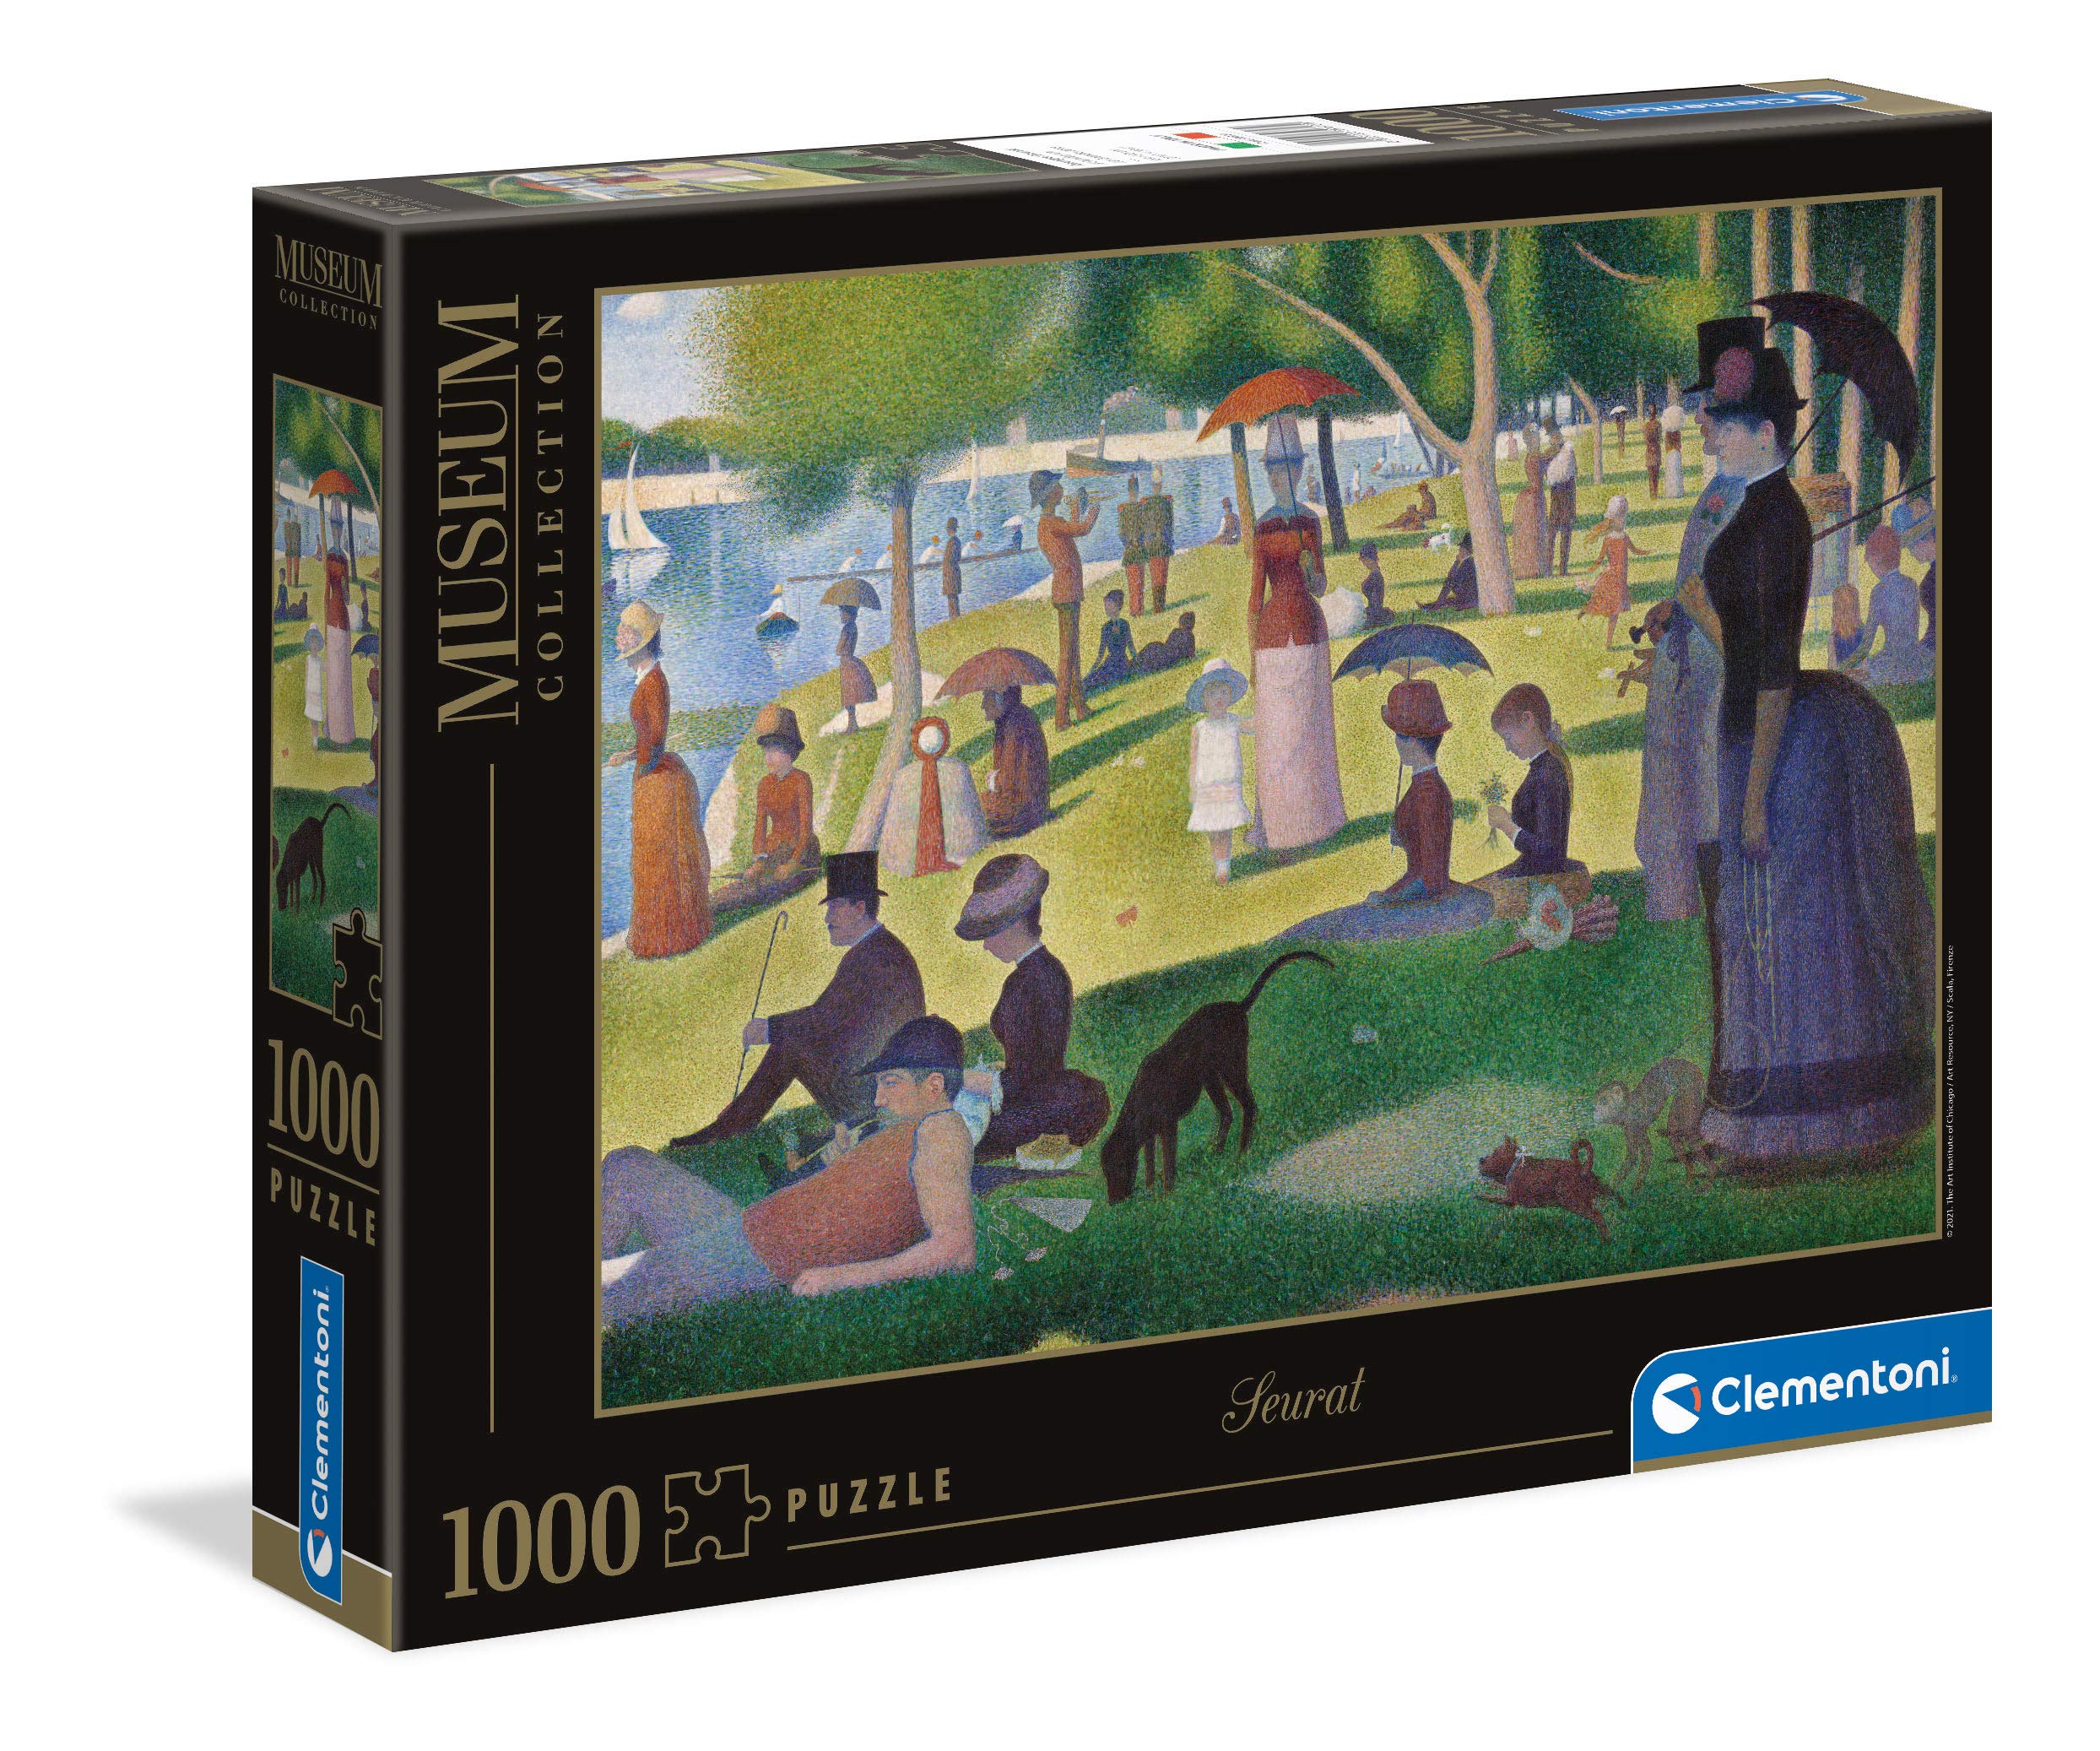 Clementoni 39613, Museum Sunday on La Grande Jatte Puzzle for Children and Adults - 1000 Pieces, Ages 10 Years Plus